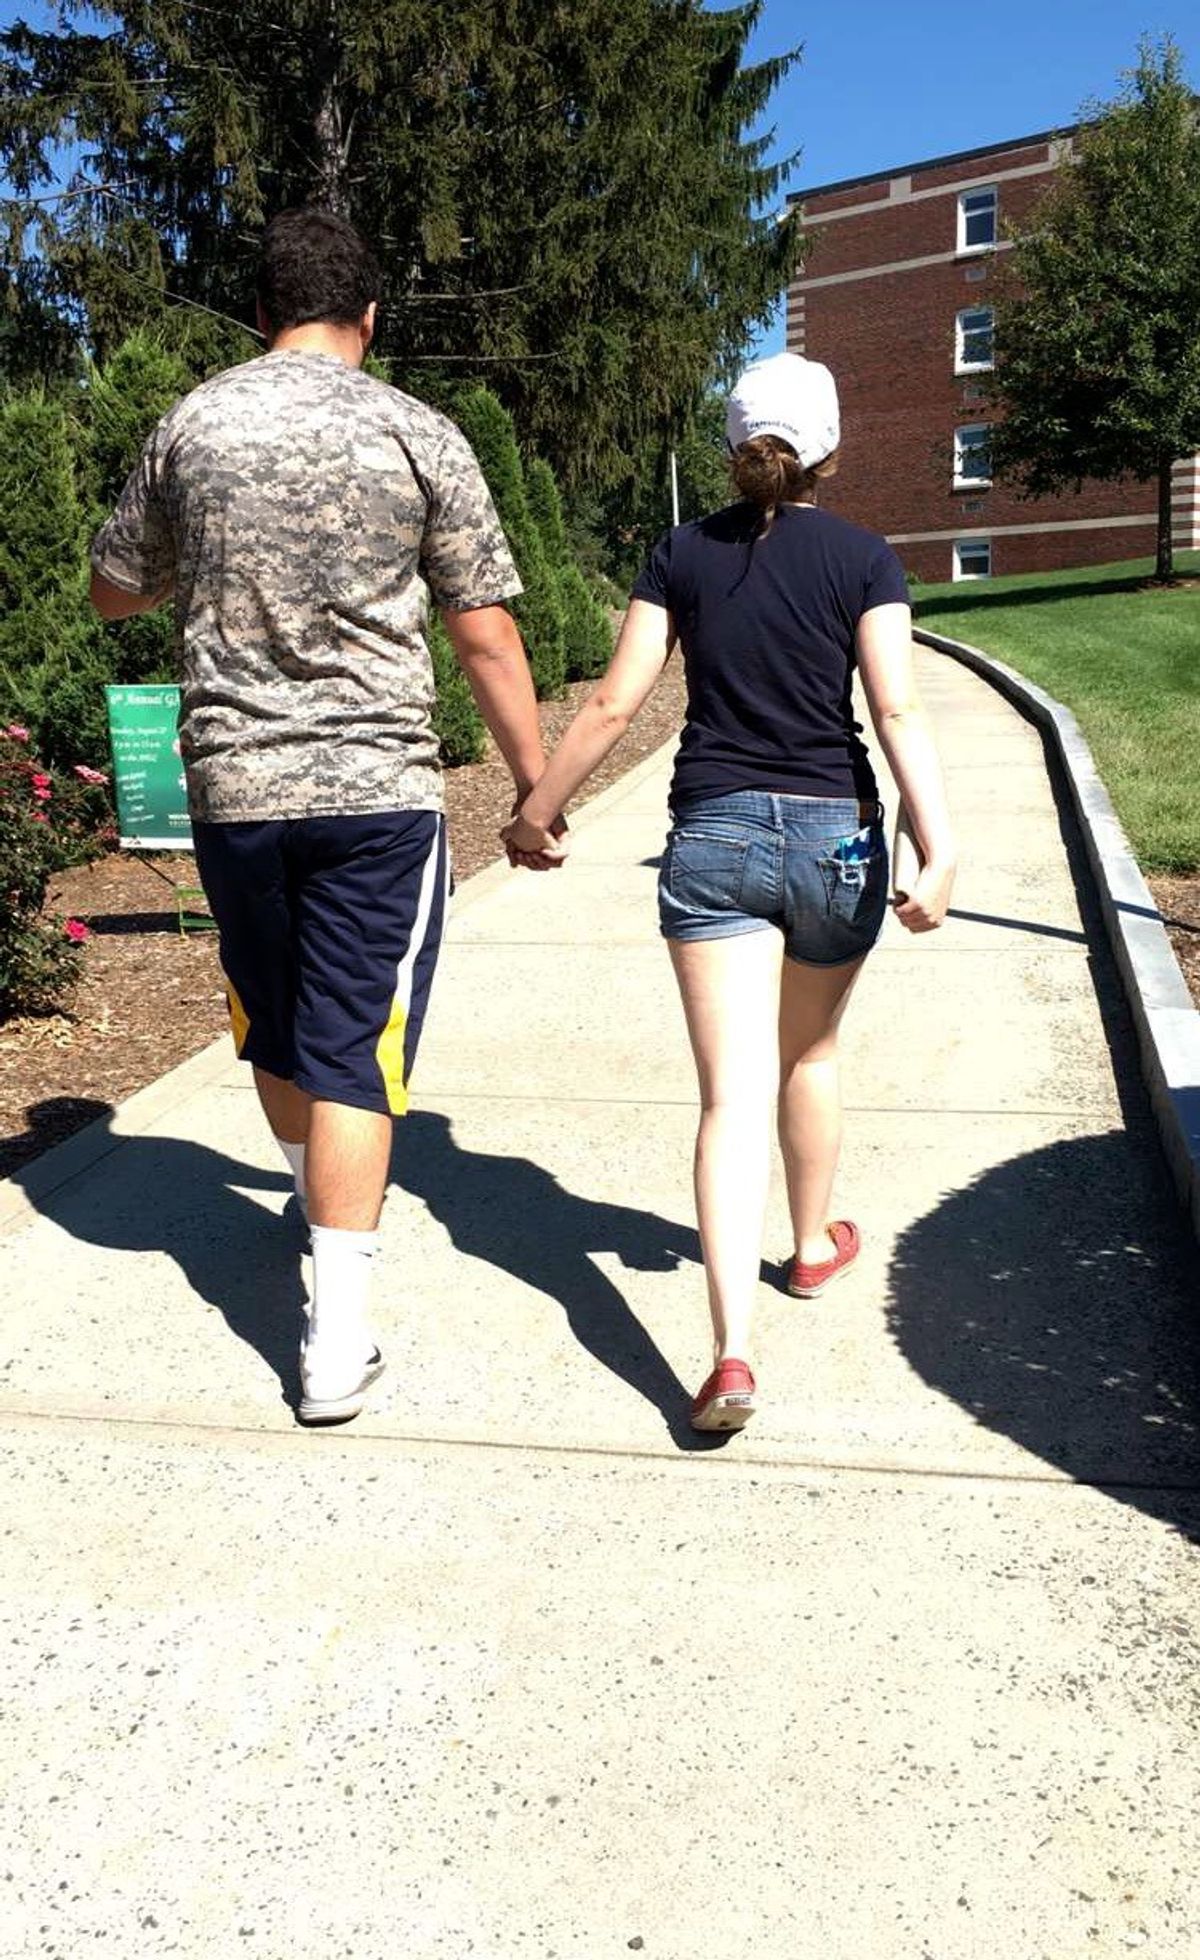 An Open Letter To My Boyfriend at a Different College